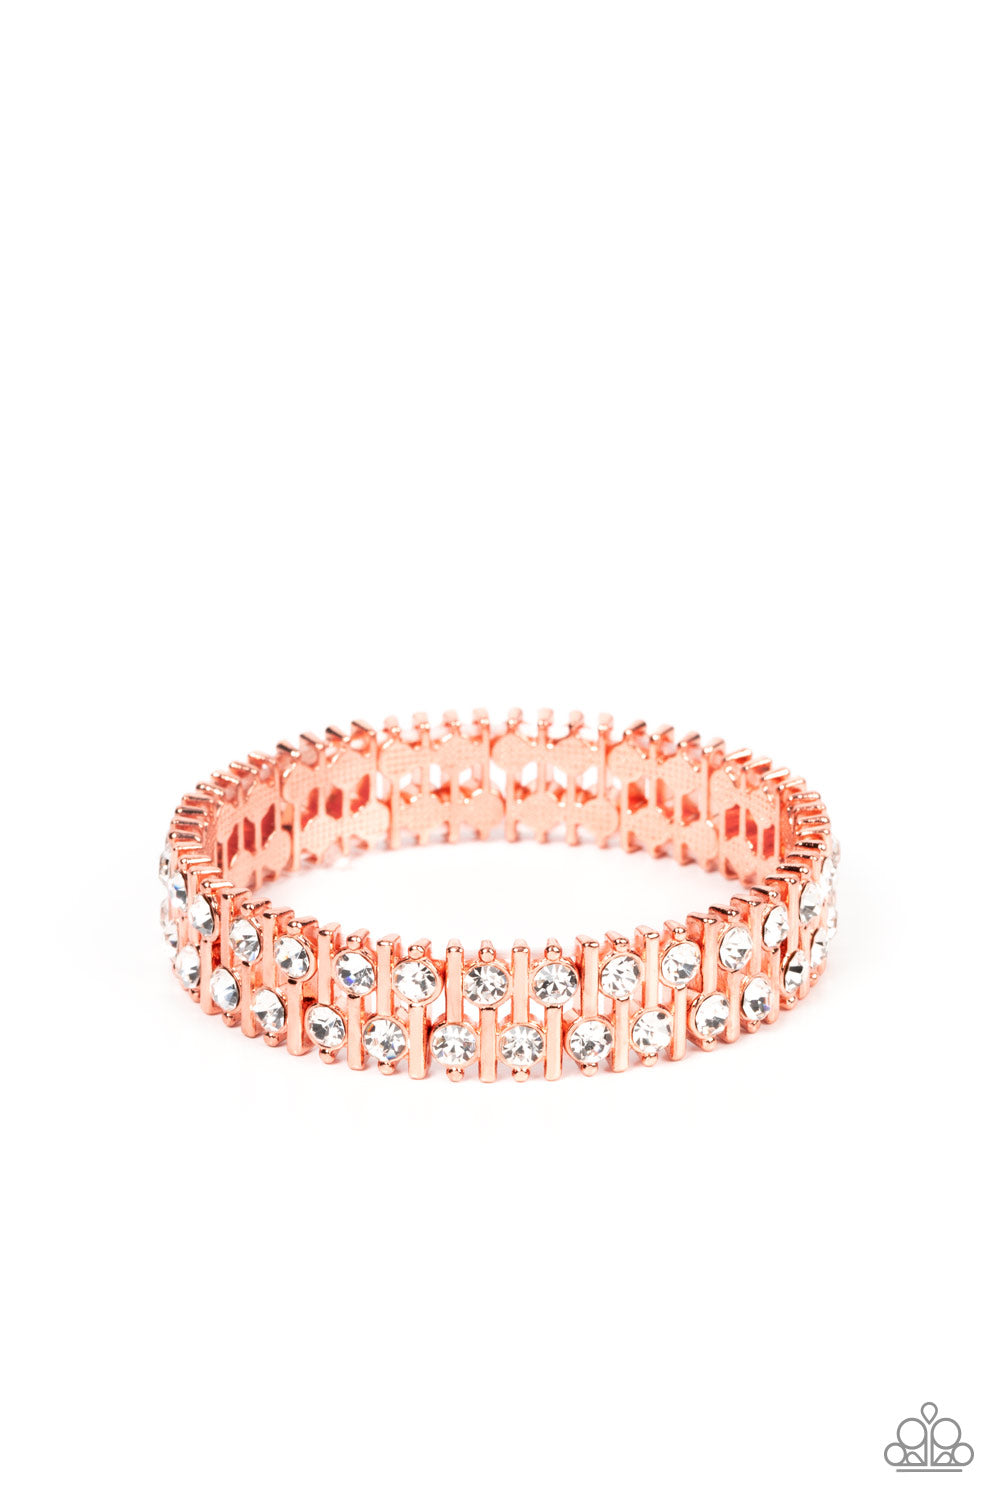 Paparazzi Accessories Generational Glimmer - Copper Attached to shiny copper bars, a staggered display of solitaire white rhinestones alternates along a stretchy band around the wrist for an unexpected pop of shimmer around the wrist. Sold as one individu